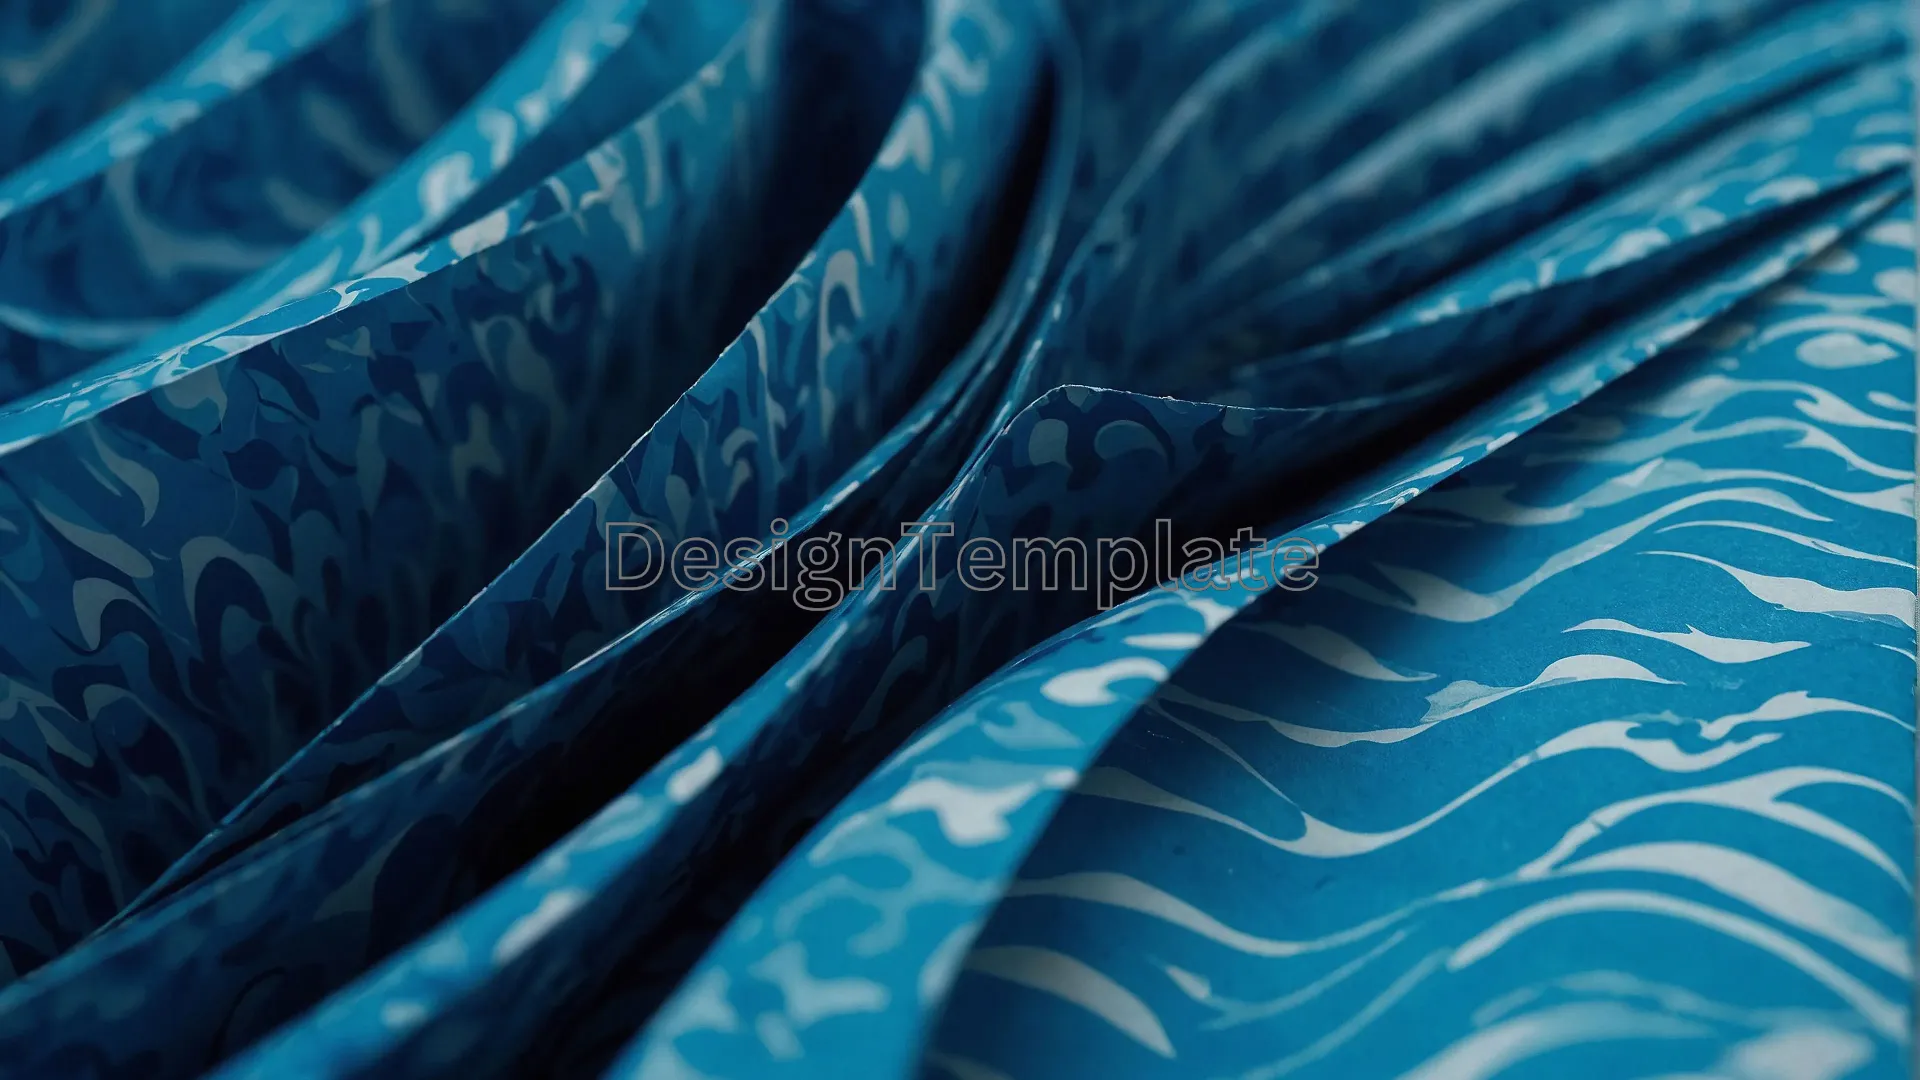 Blue Paper Crafted in Wavy Style Background Image